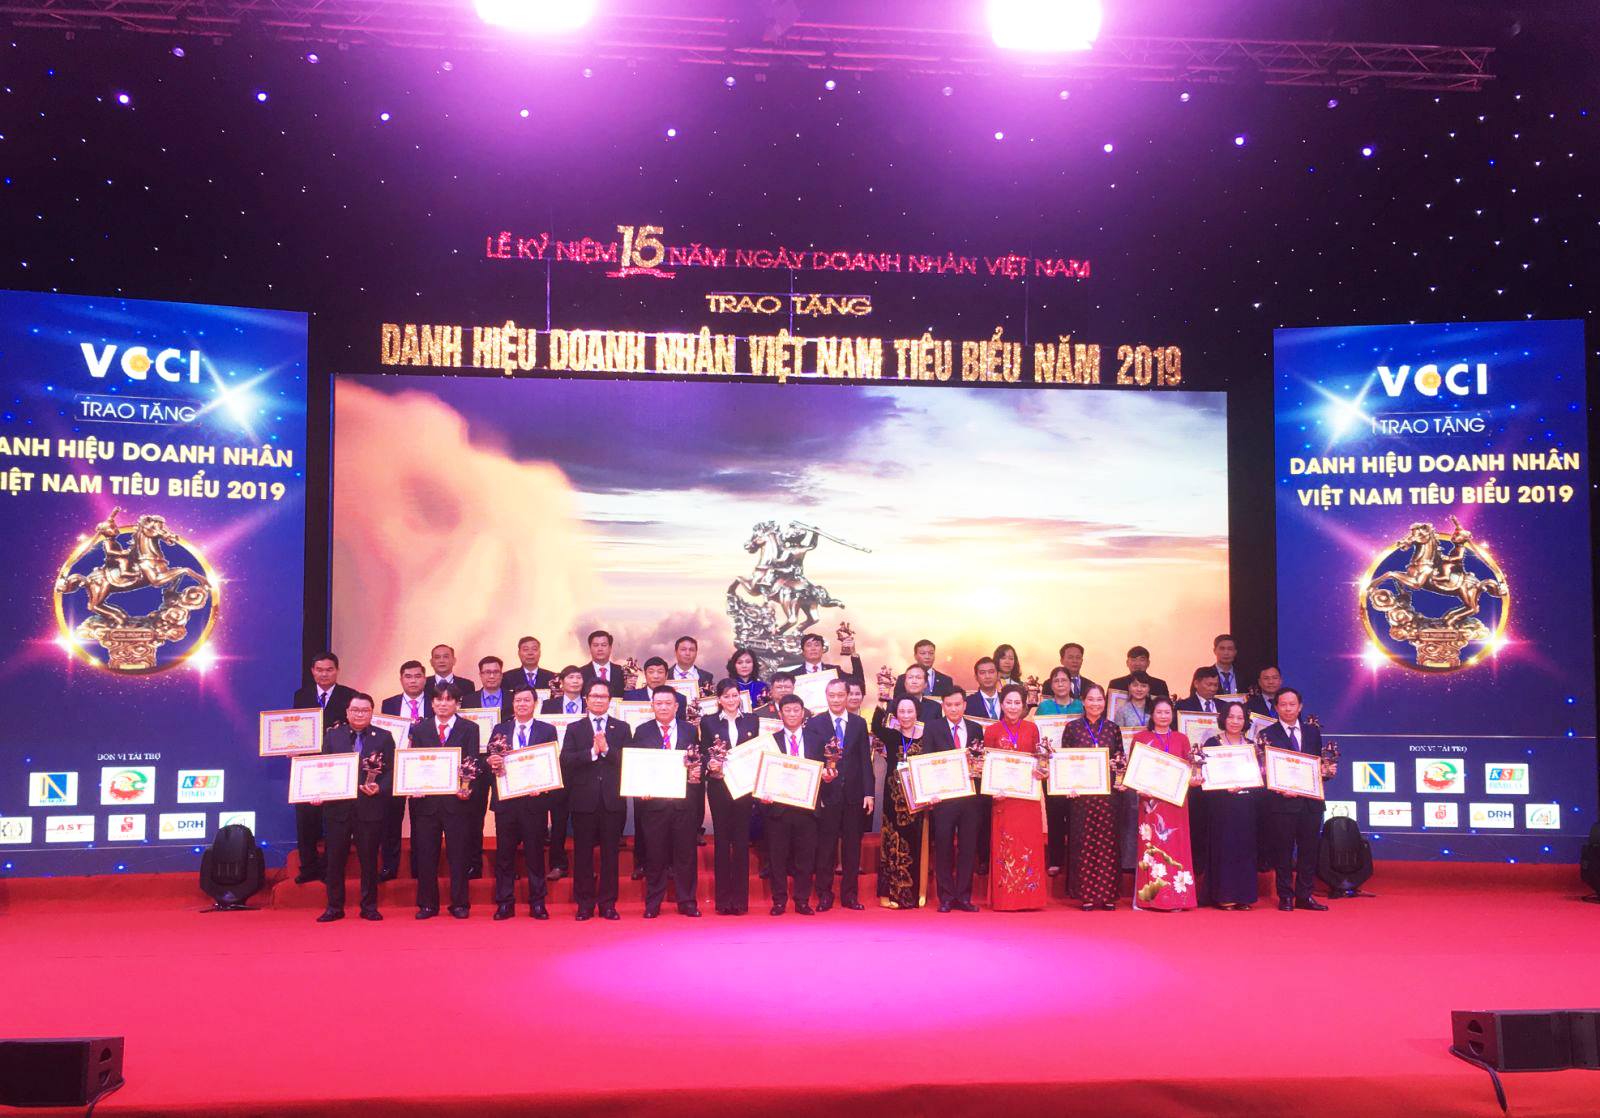 Chairman Dinh Hong Ky was awarded the title of Vietnam Entrepreneur of 2019 by VCCI